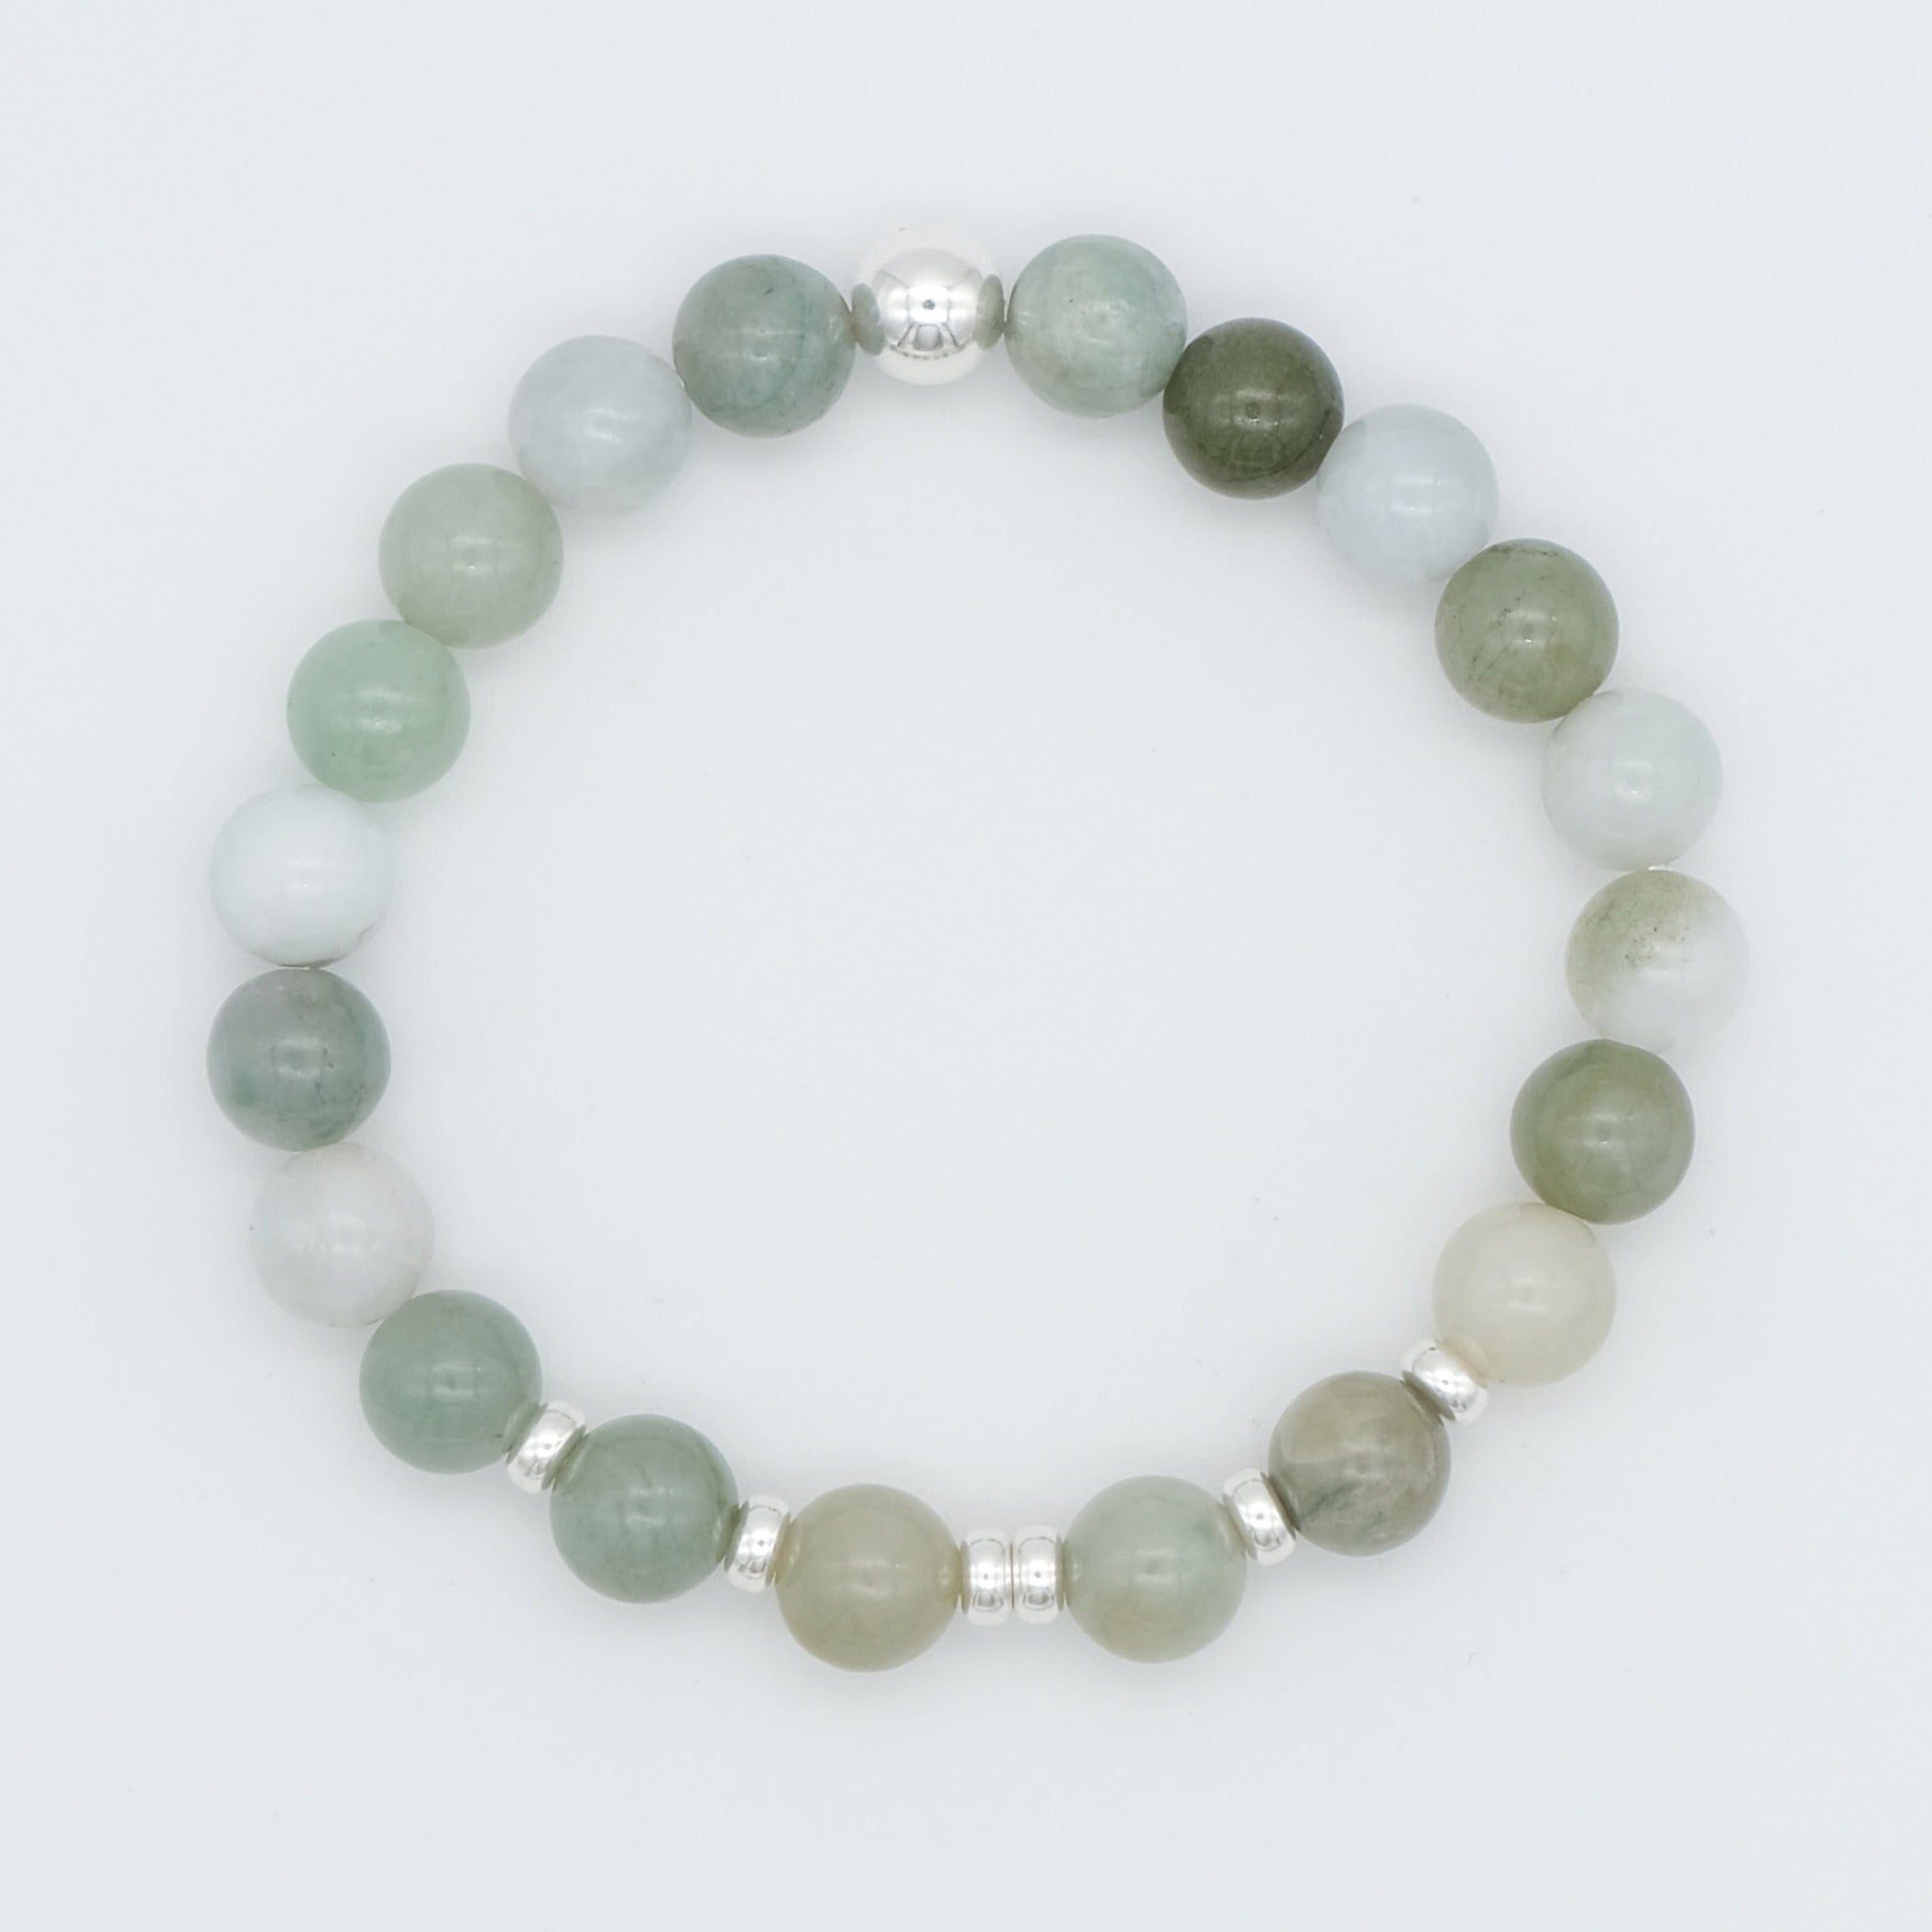 A jade gemstone bracelet with silver accessories from above